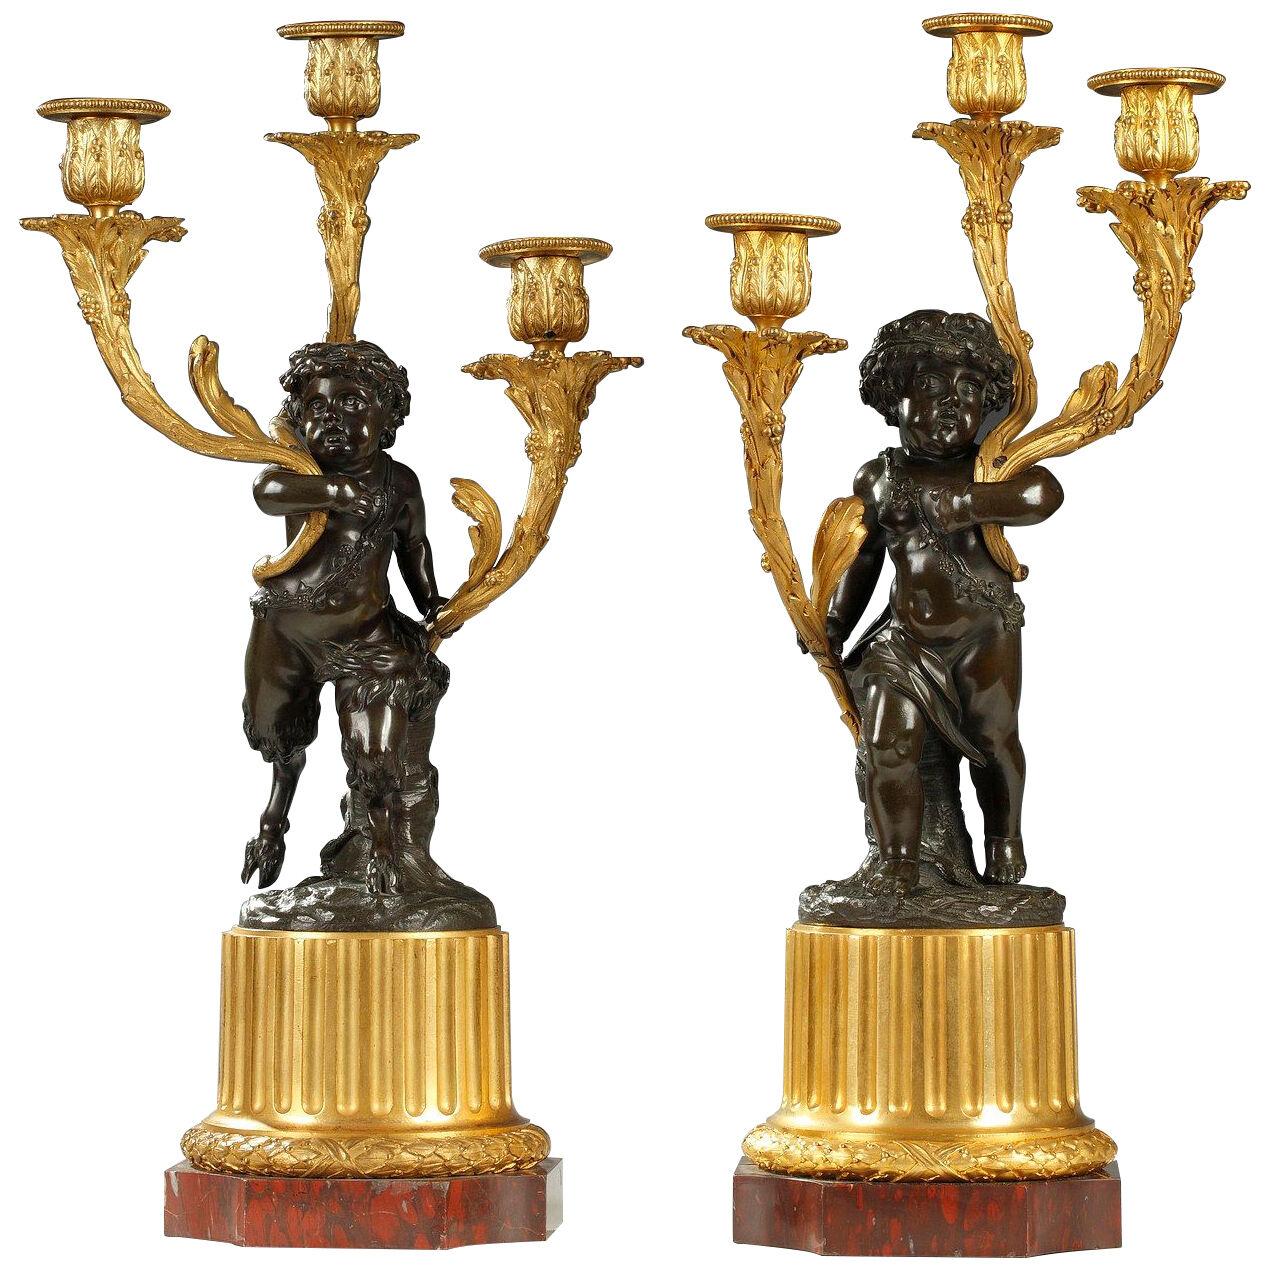 "Faun and Bacchus" Bronze Candelabras After Clodion, France, Circa 1880